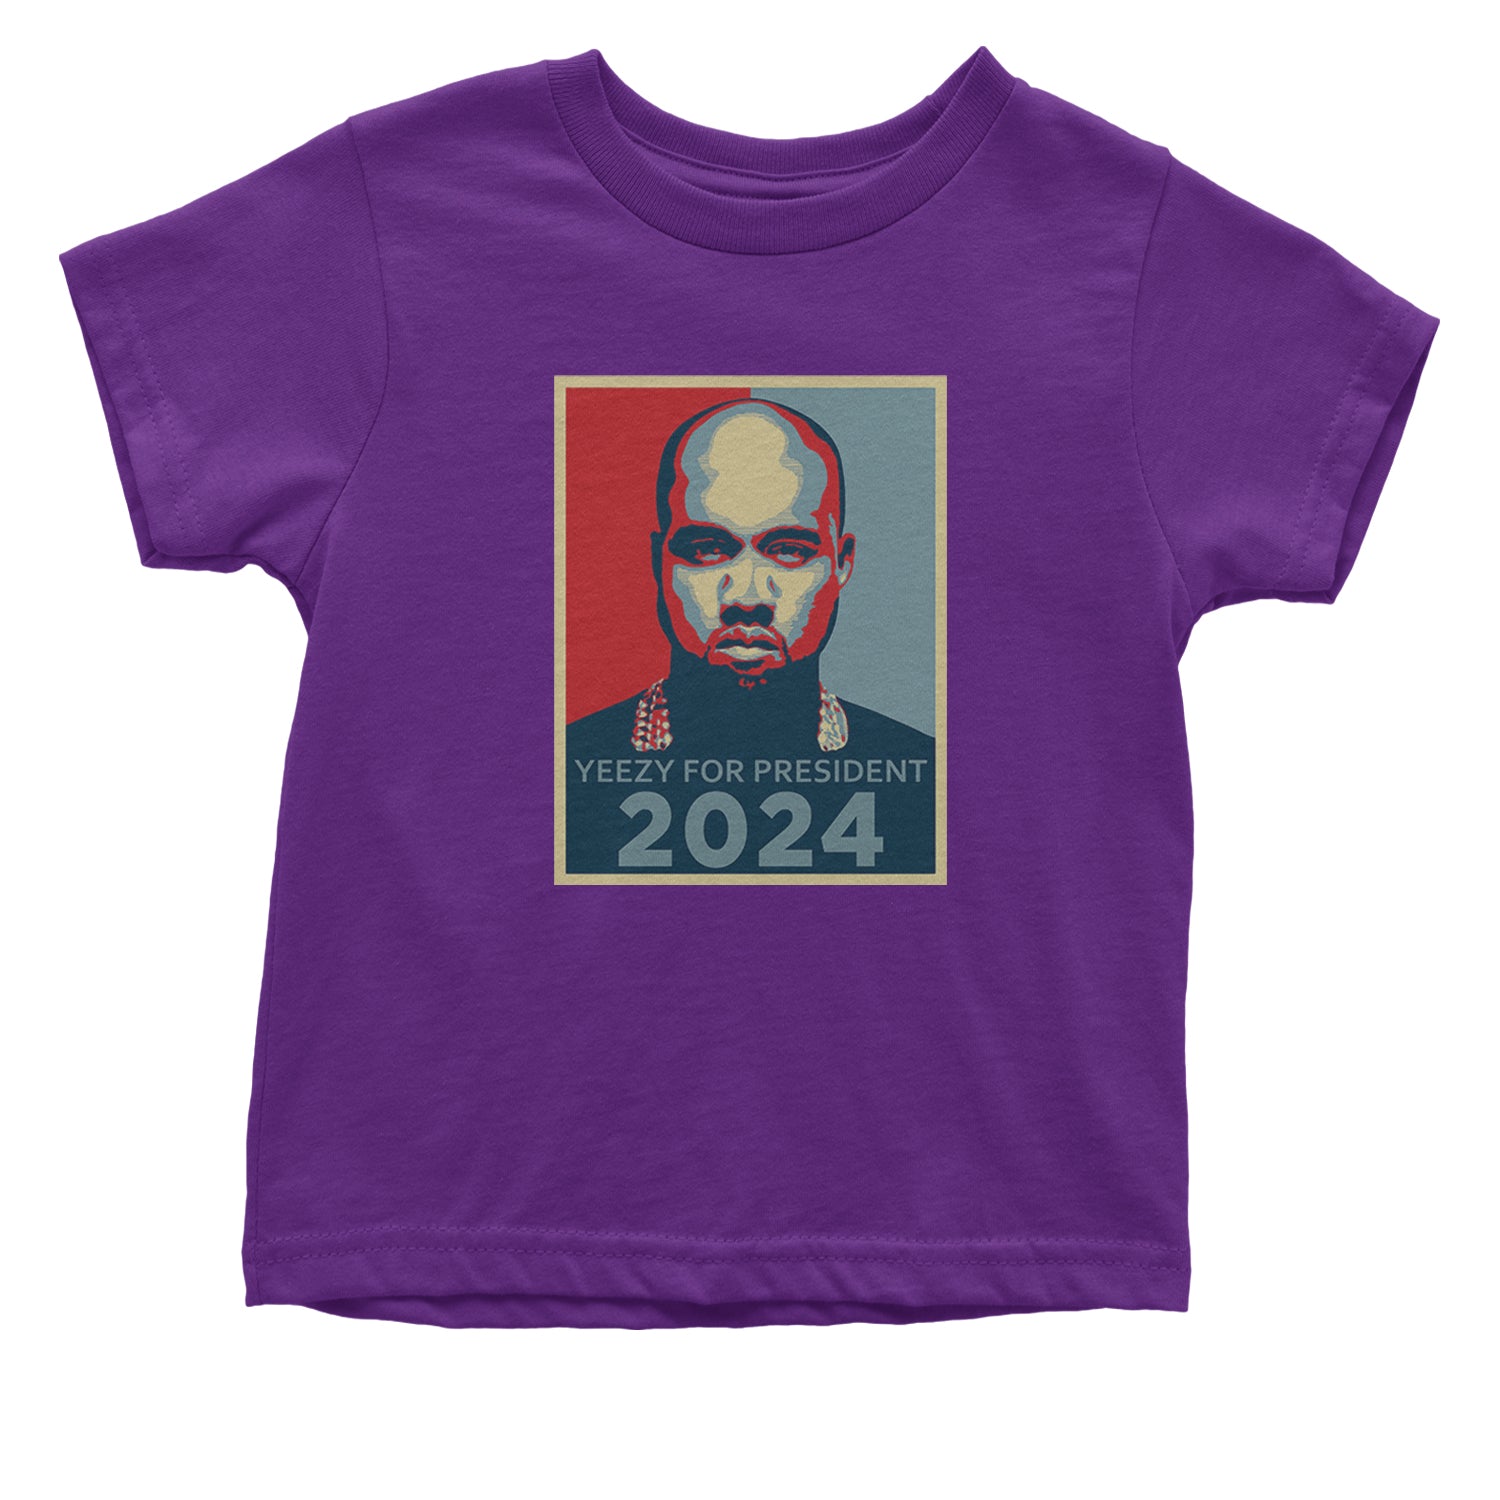 Yeezus For President Vote for Ye Infant One-Piece Romper Bodysuit and Toddler T-shirt Purple